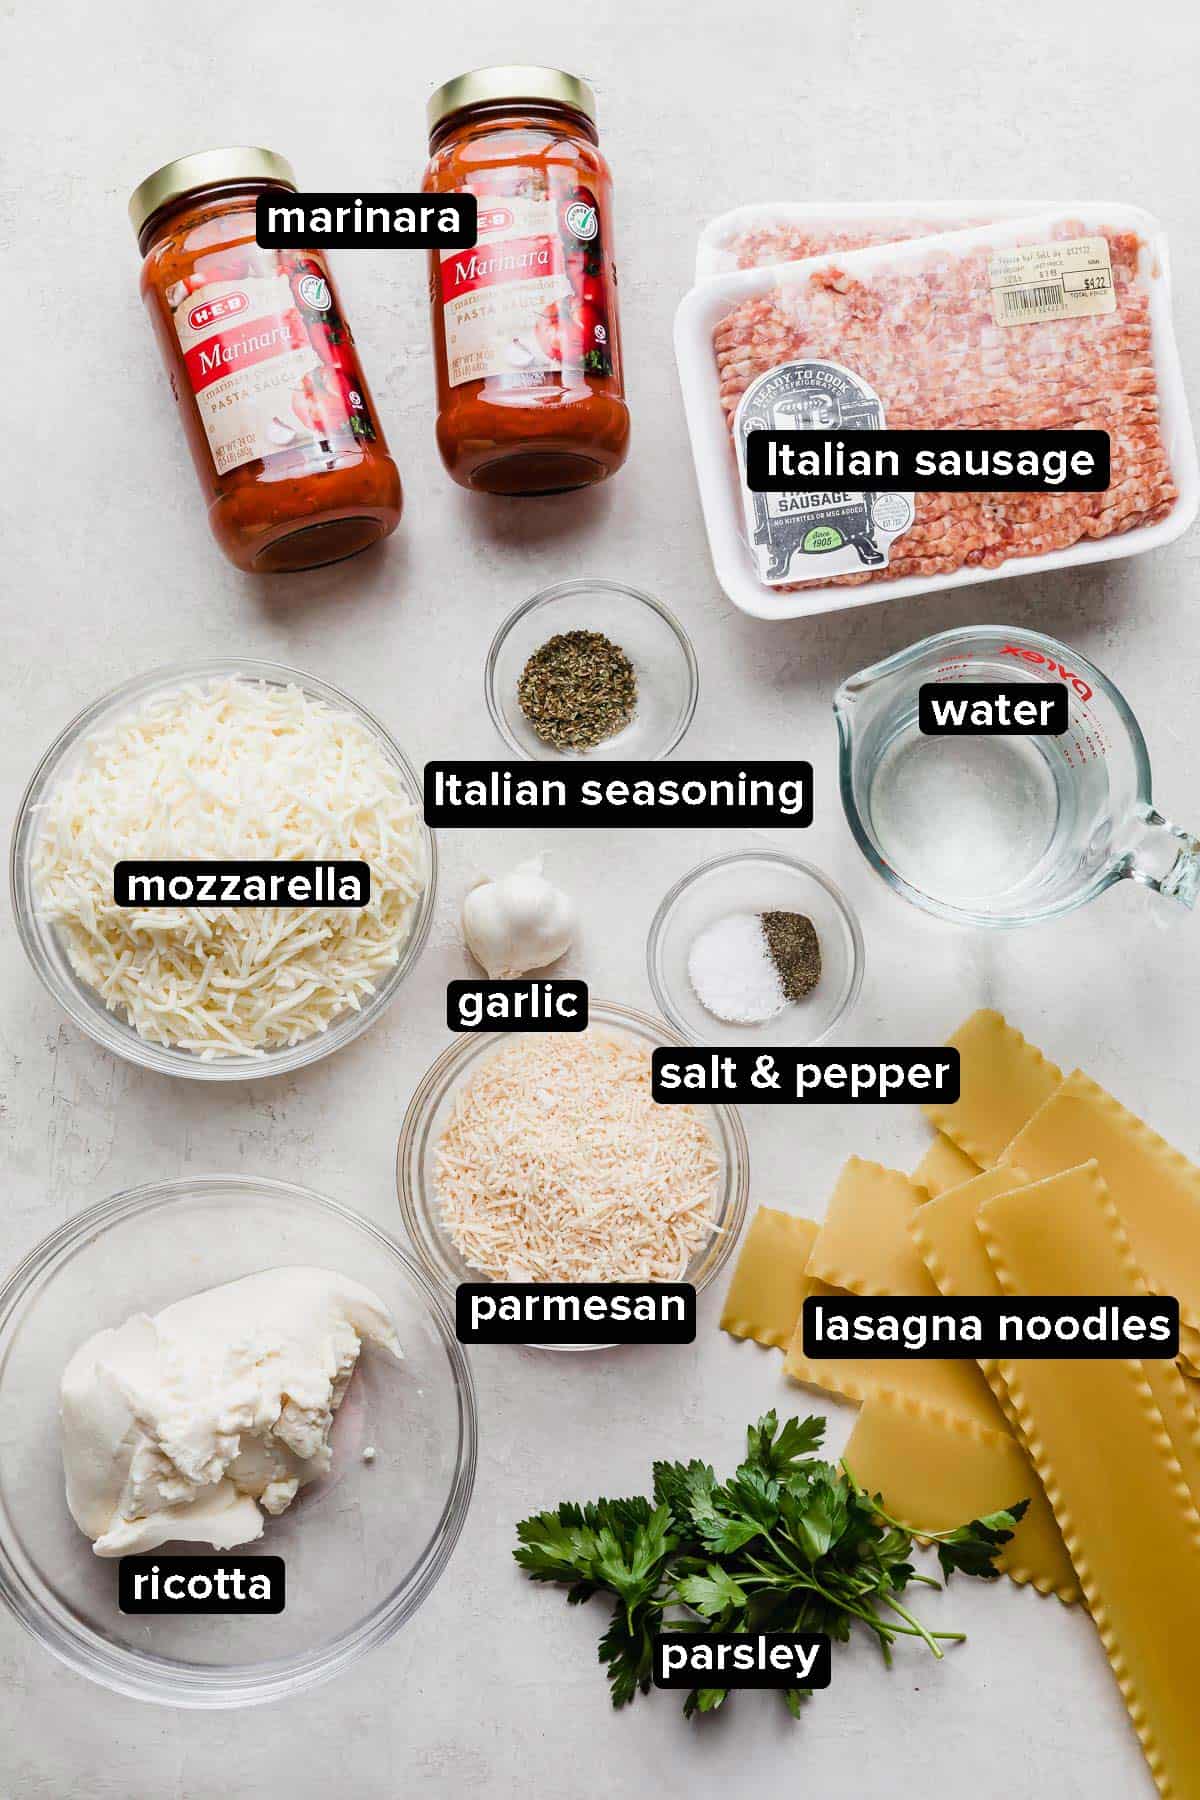 Slow Cooker Lasagna ingredients on a white background including jar sauce, ricotta, and uncooked lasagna noodles.